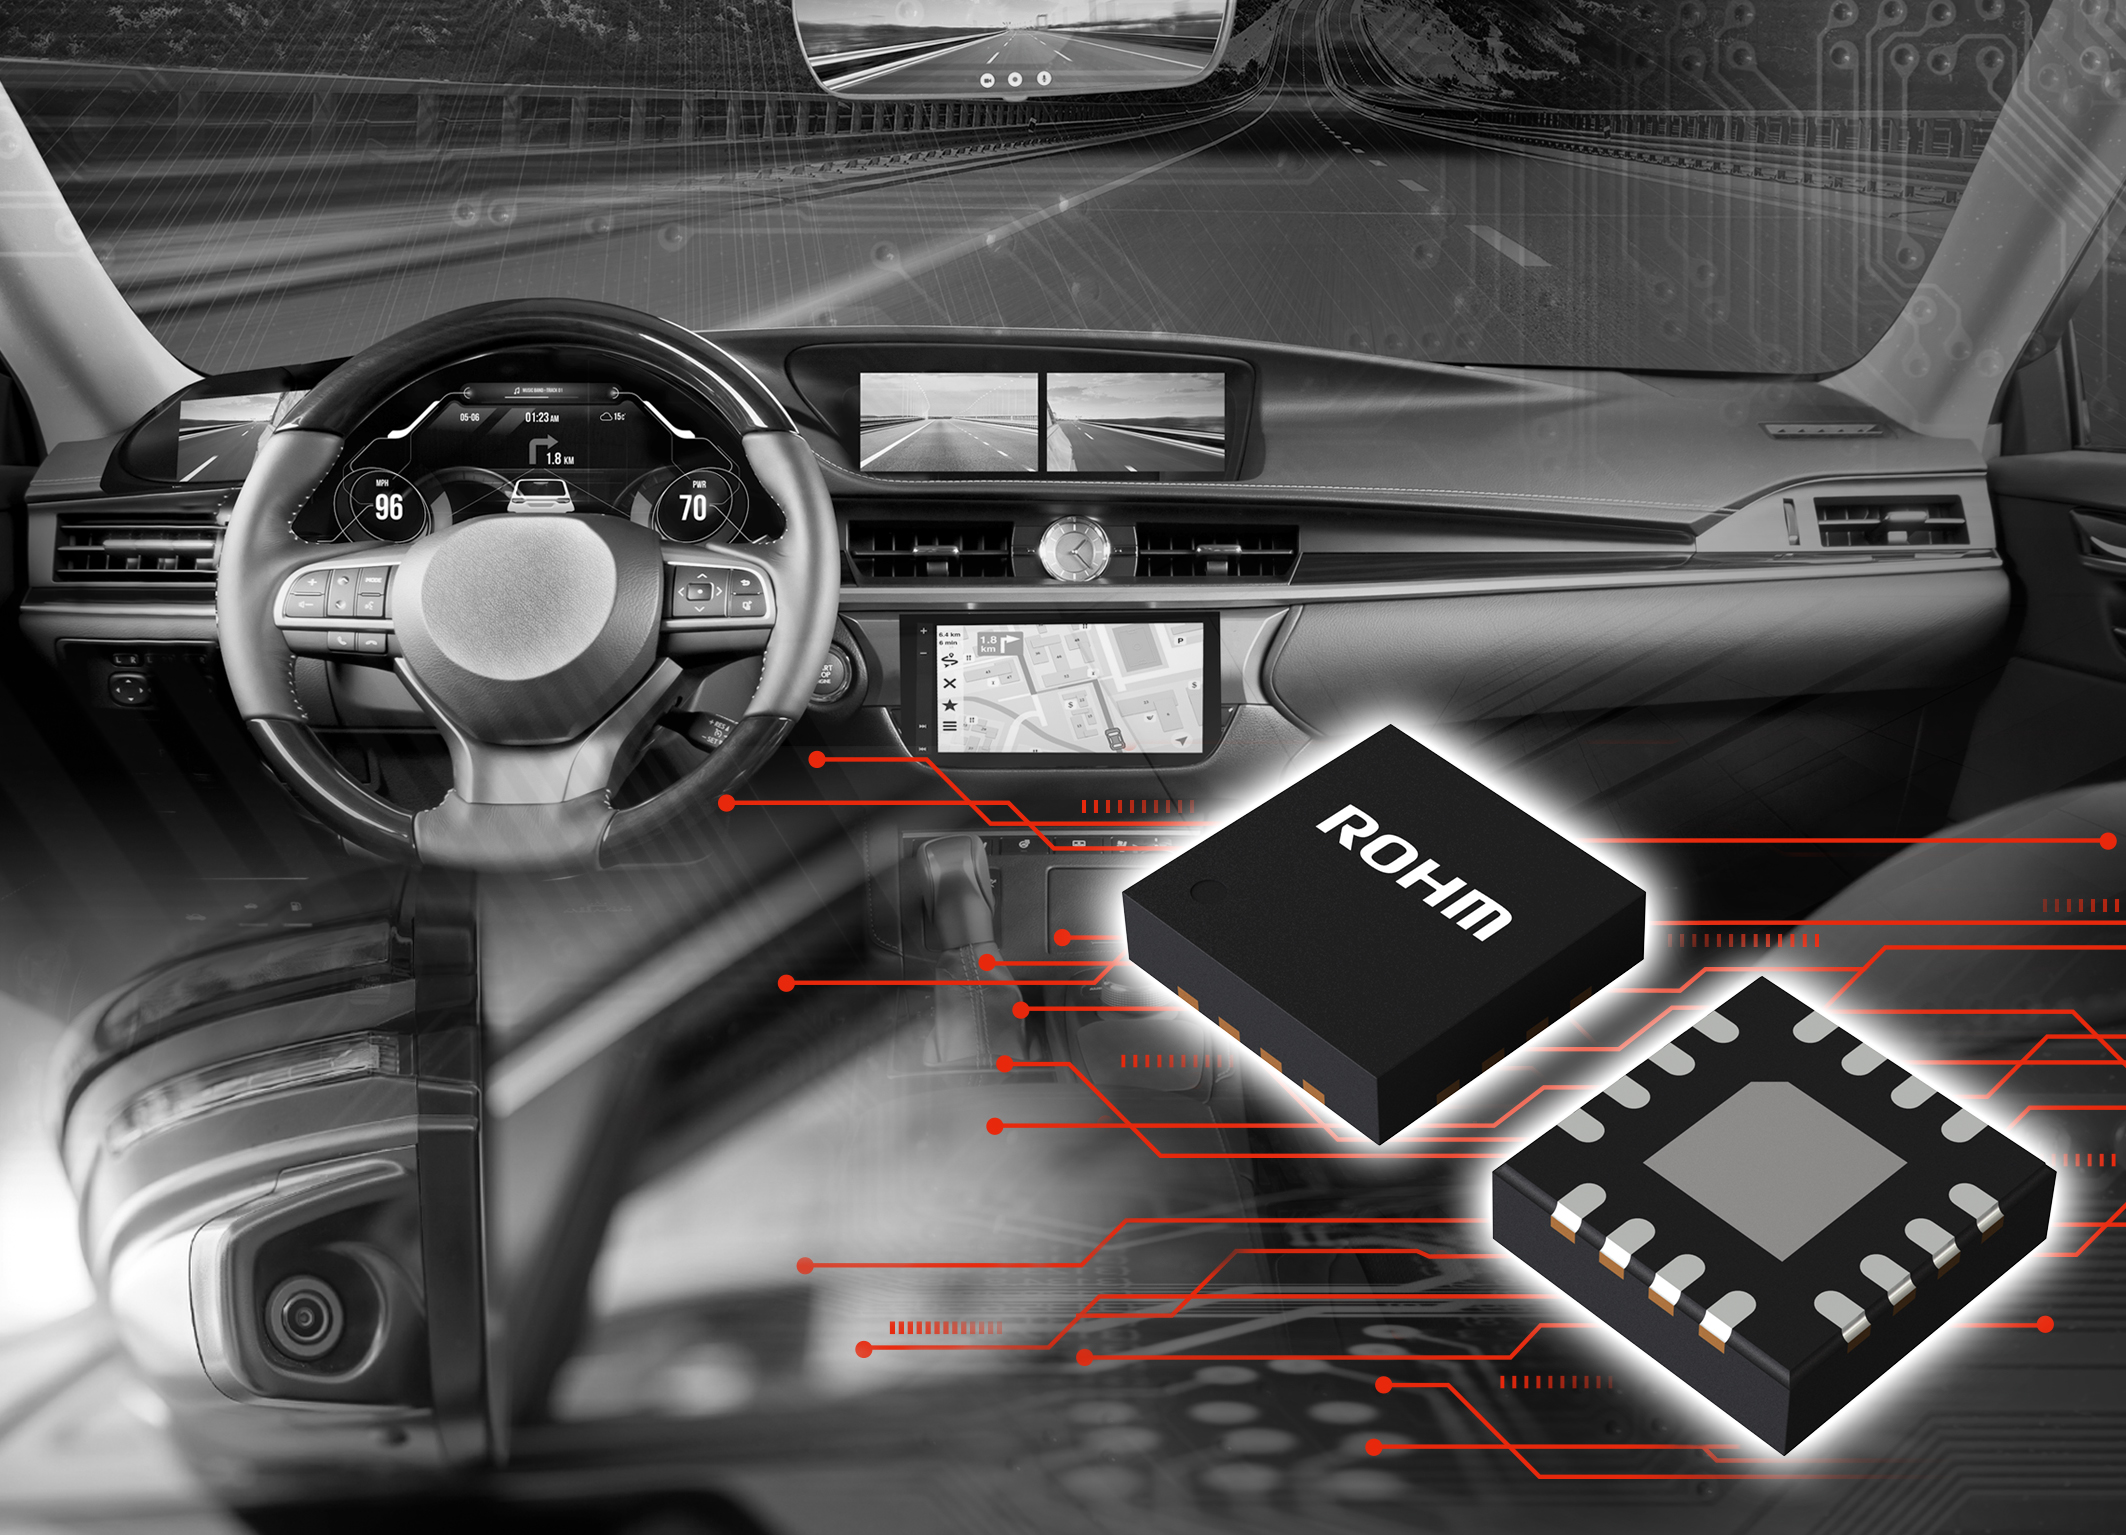 DC/DC Converter IC for ADAS Achieves Best-in-Class Stable Operation